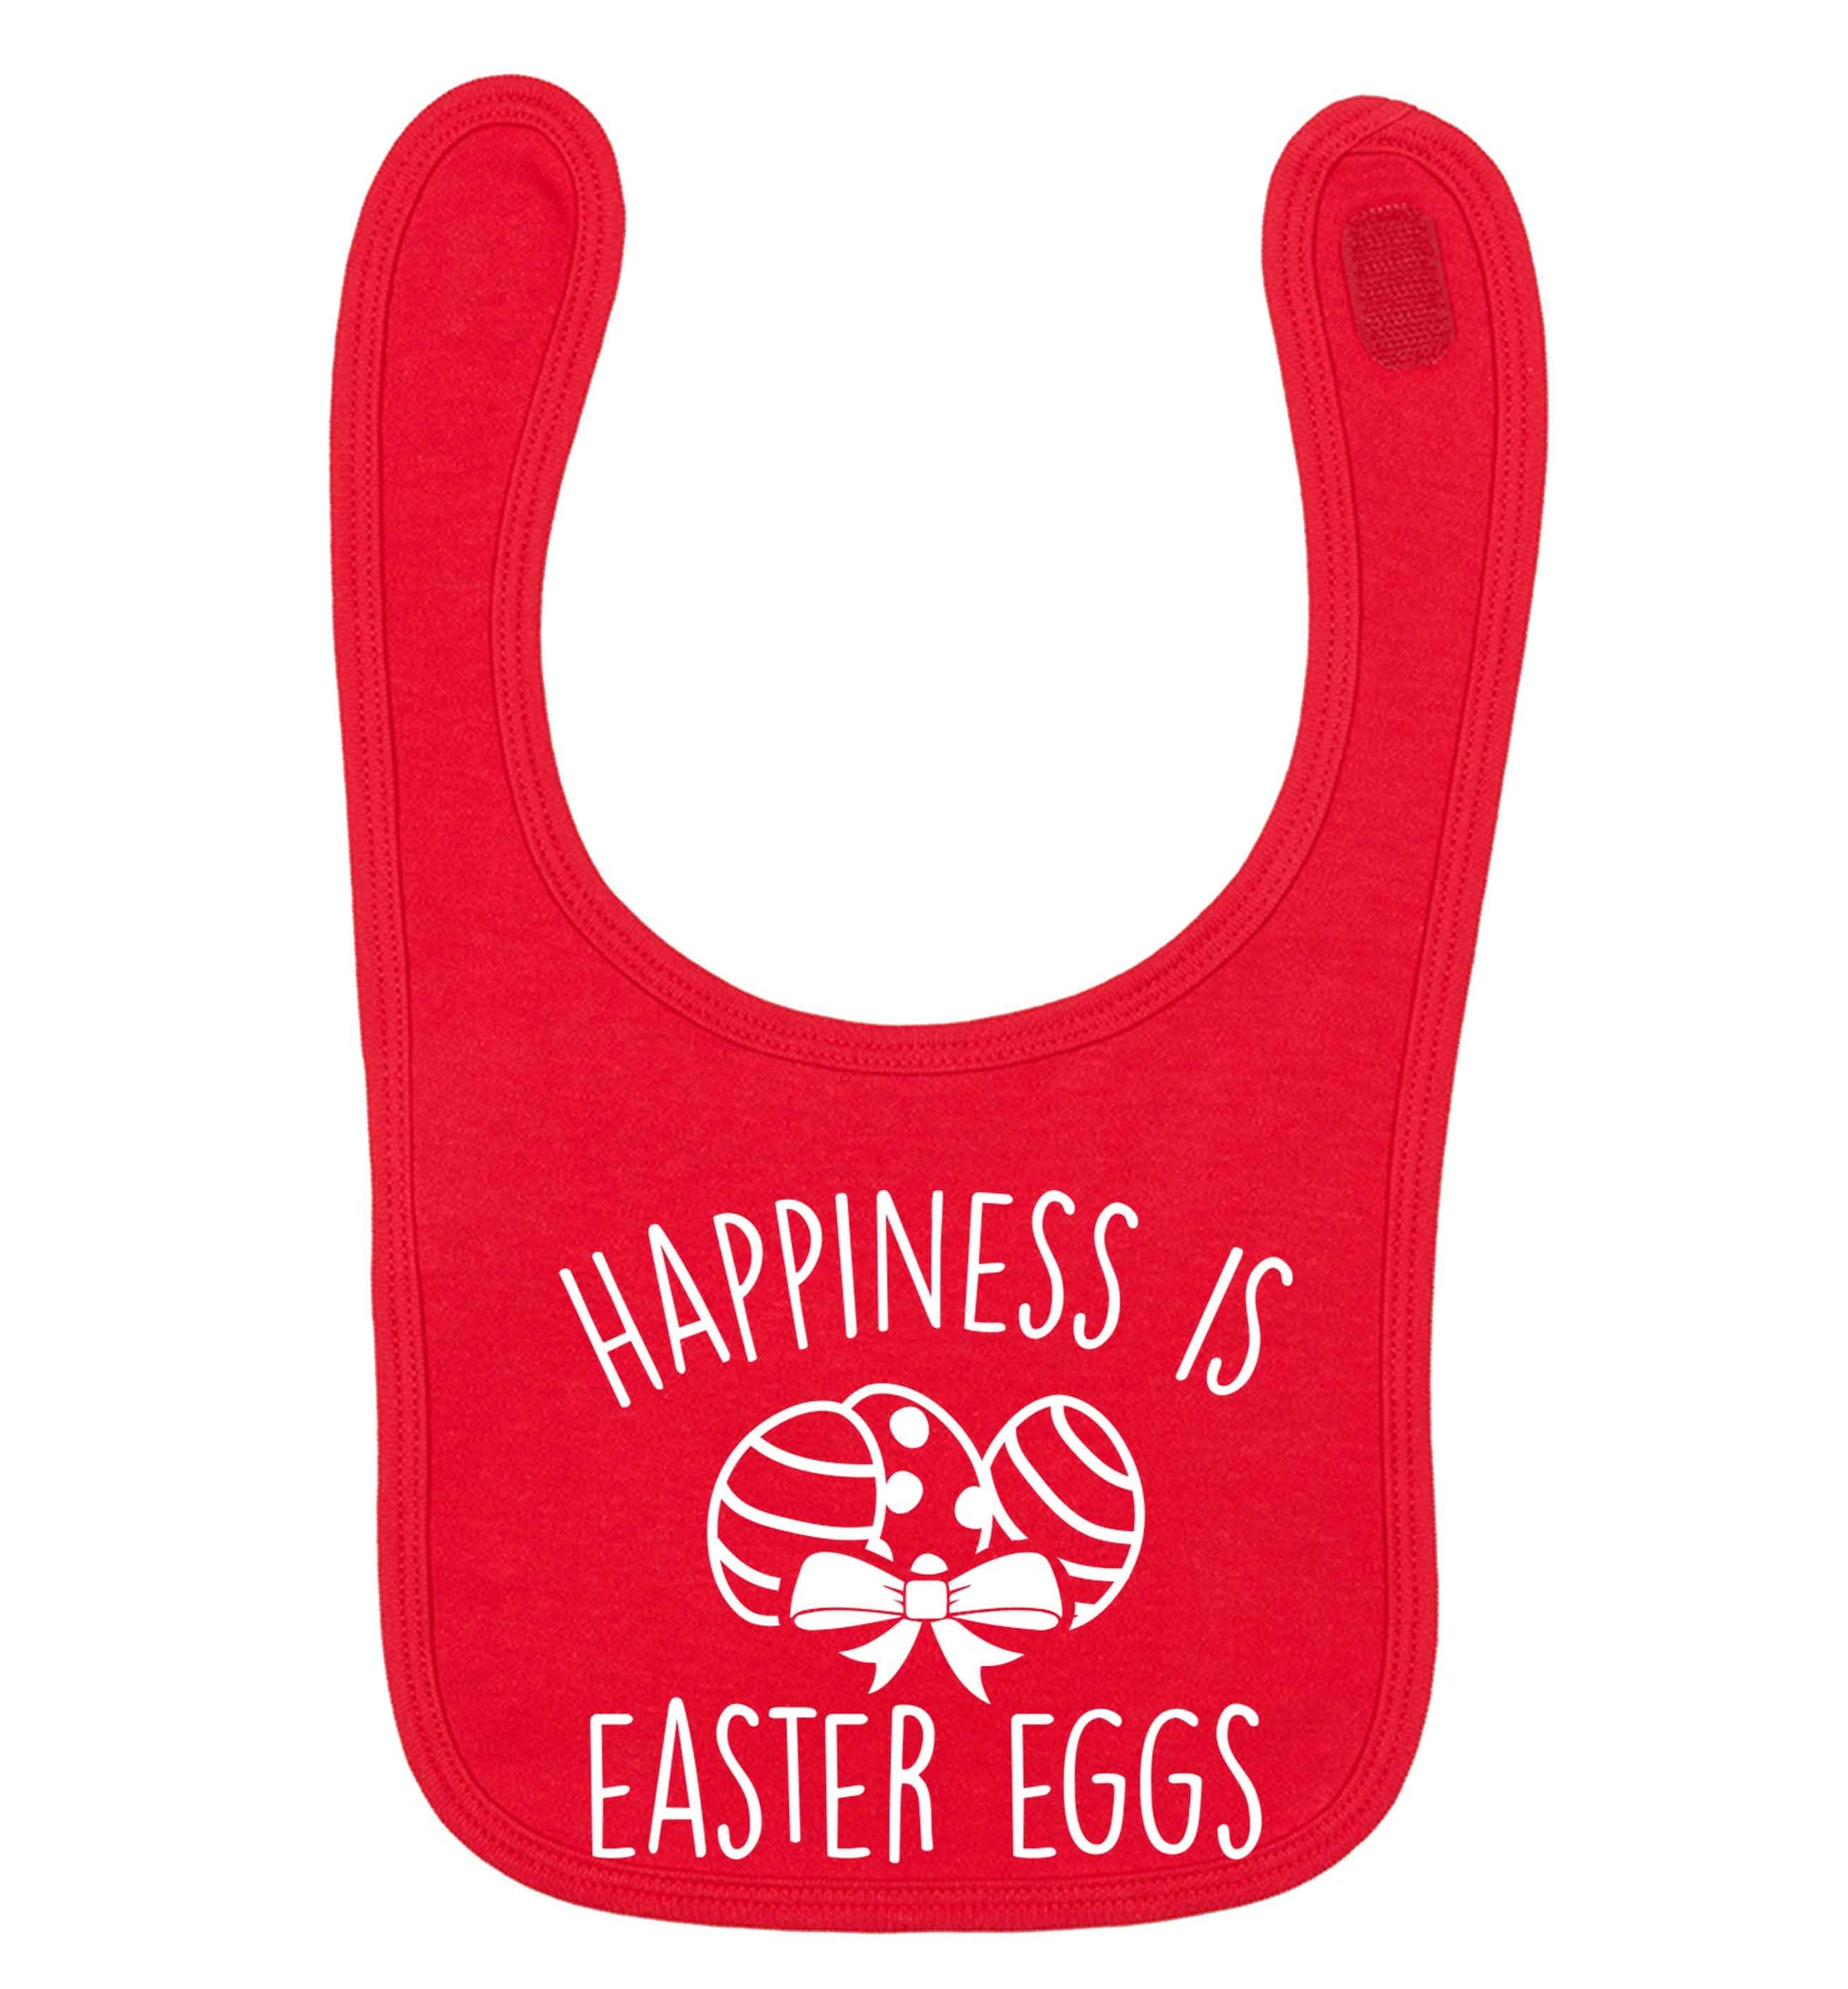 Happiness is Easter eggs red baby bib